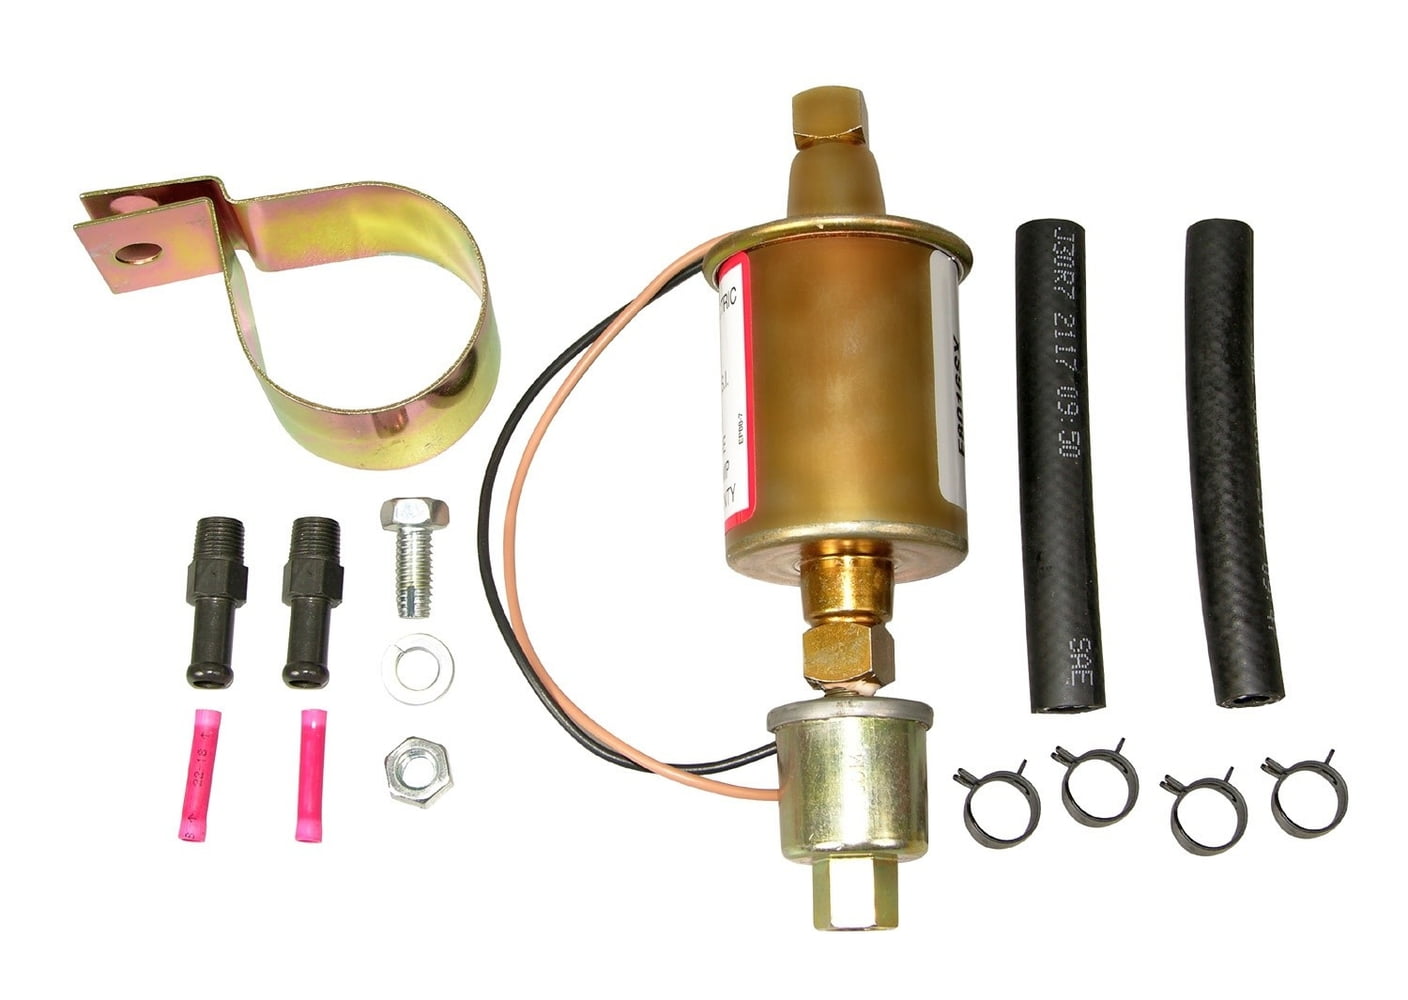 P4070 In-Line Electric Fuel Pump with 1/4 NPT Inlet Yikesai 